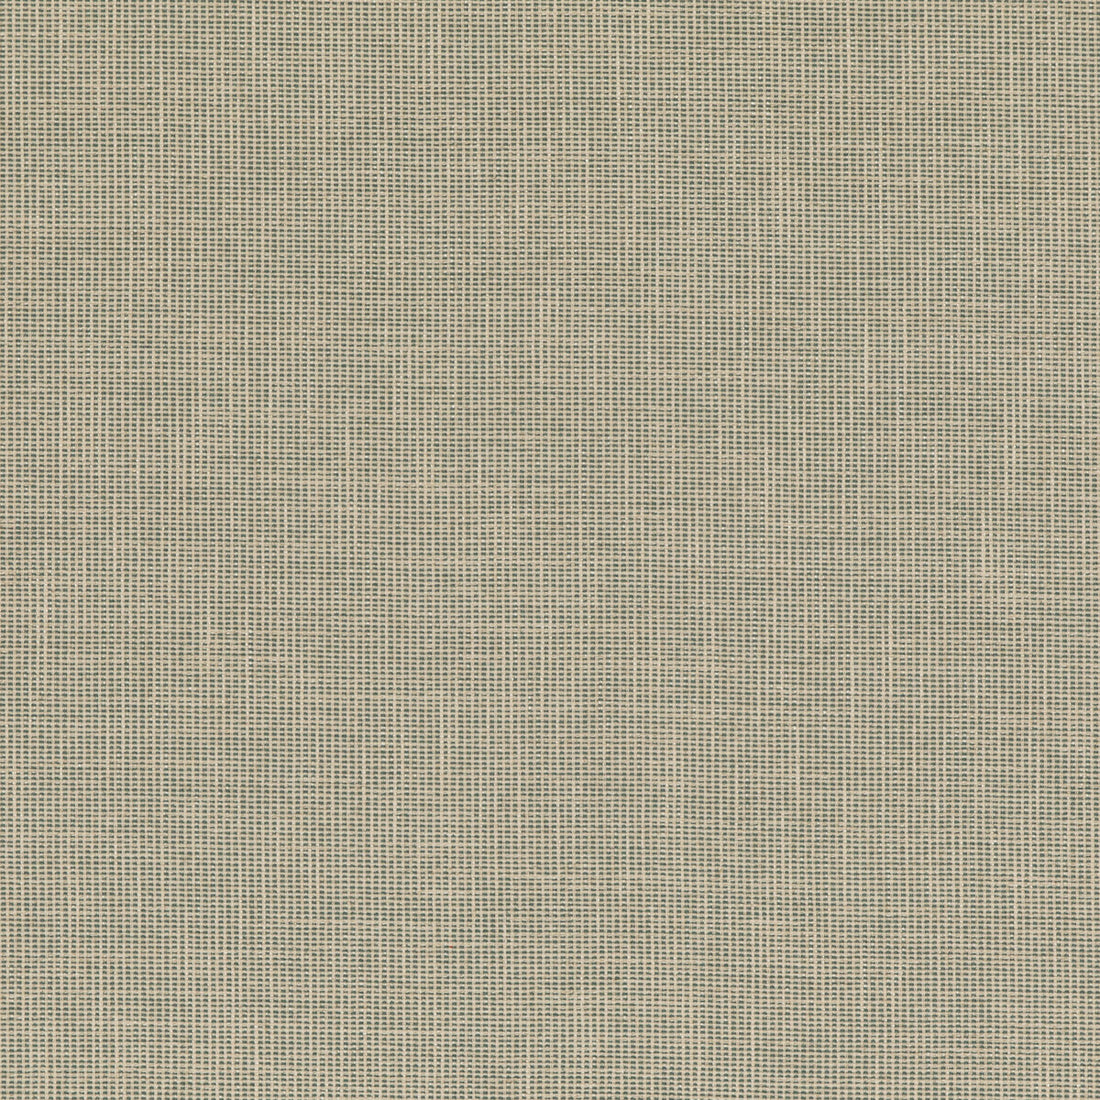 Folly fabric in aqua color - pattern PF50487.725.0 - by Baker Lifestyle in the Block Weaves collection